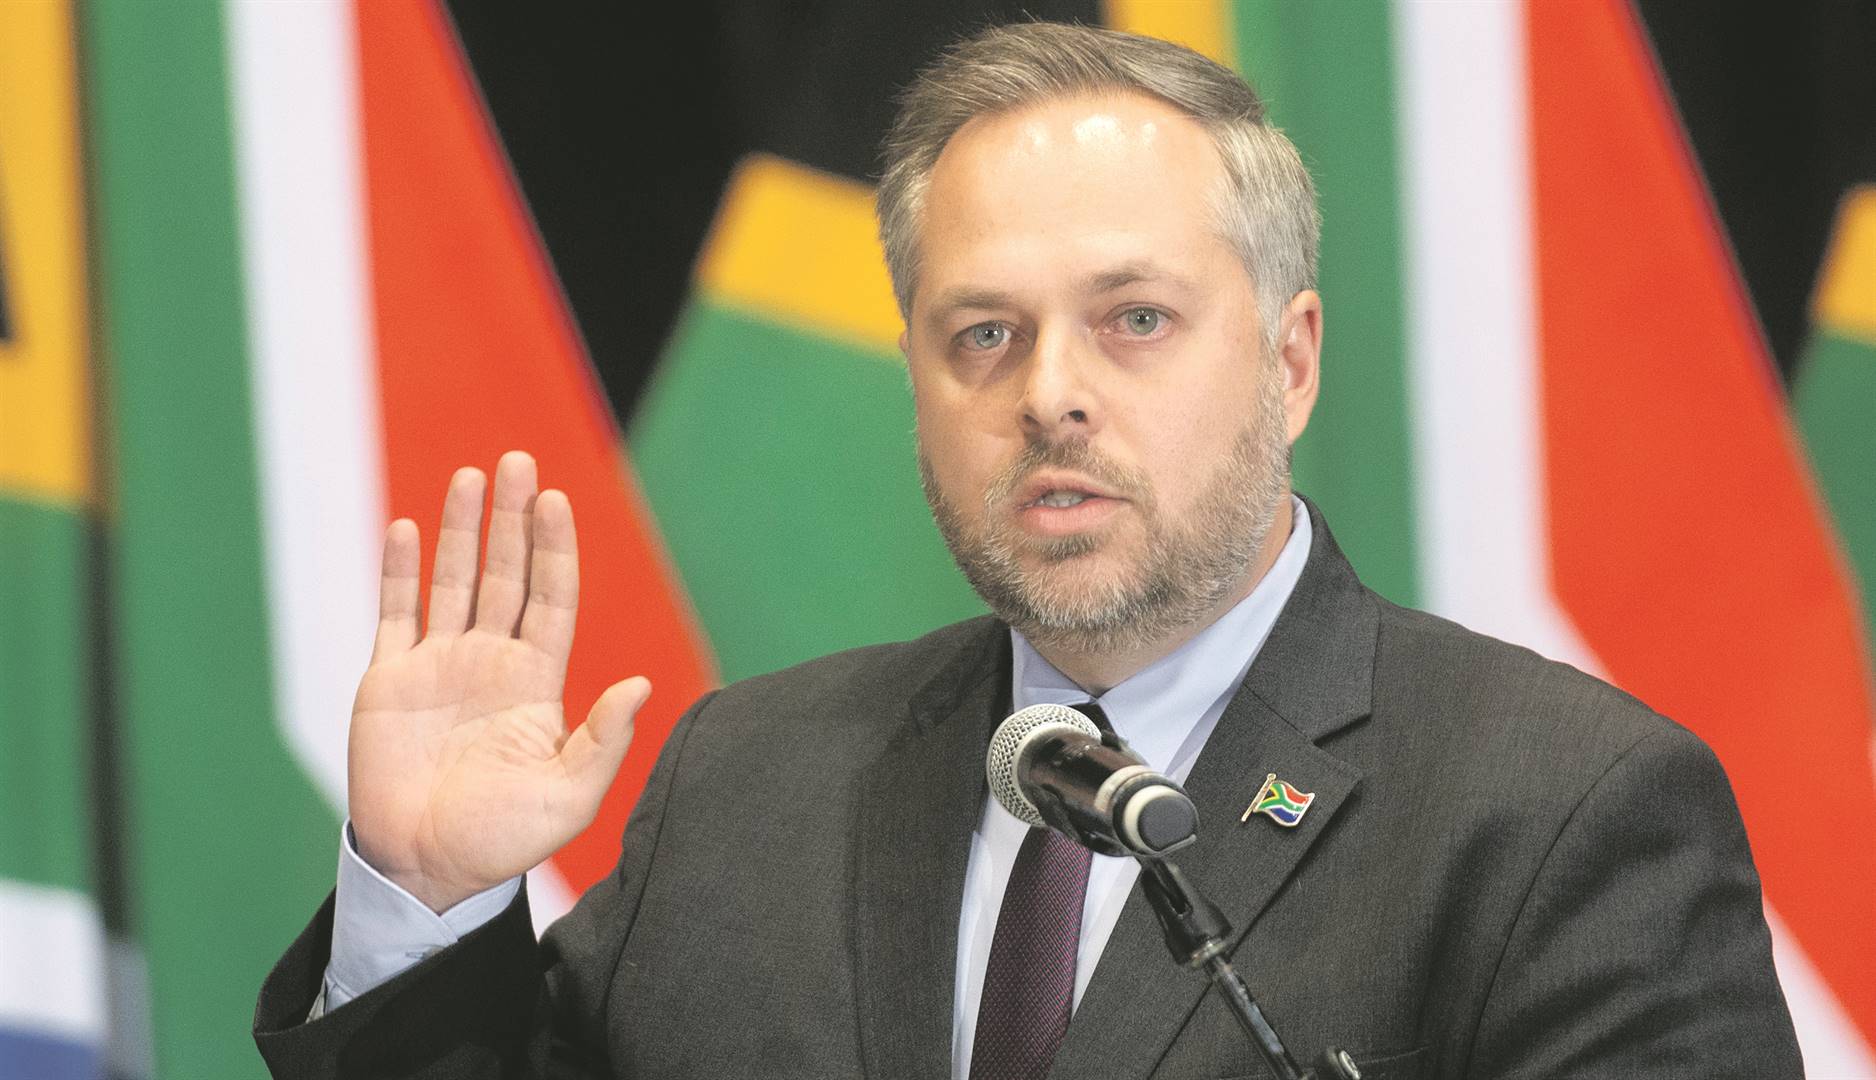 News24 | New Home Affairs Minister Leon Schreiber issues first orders days after appointment